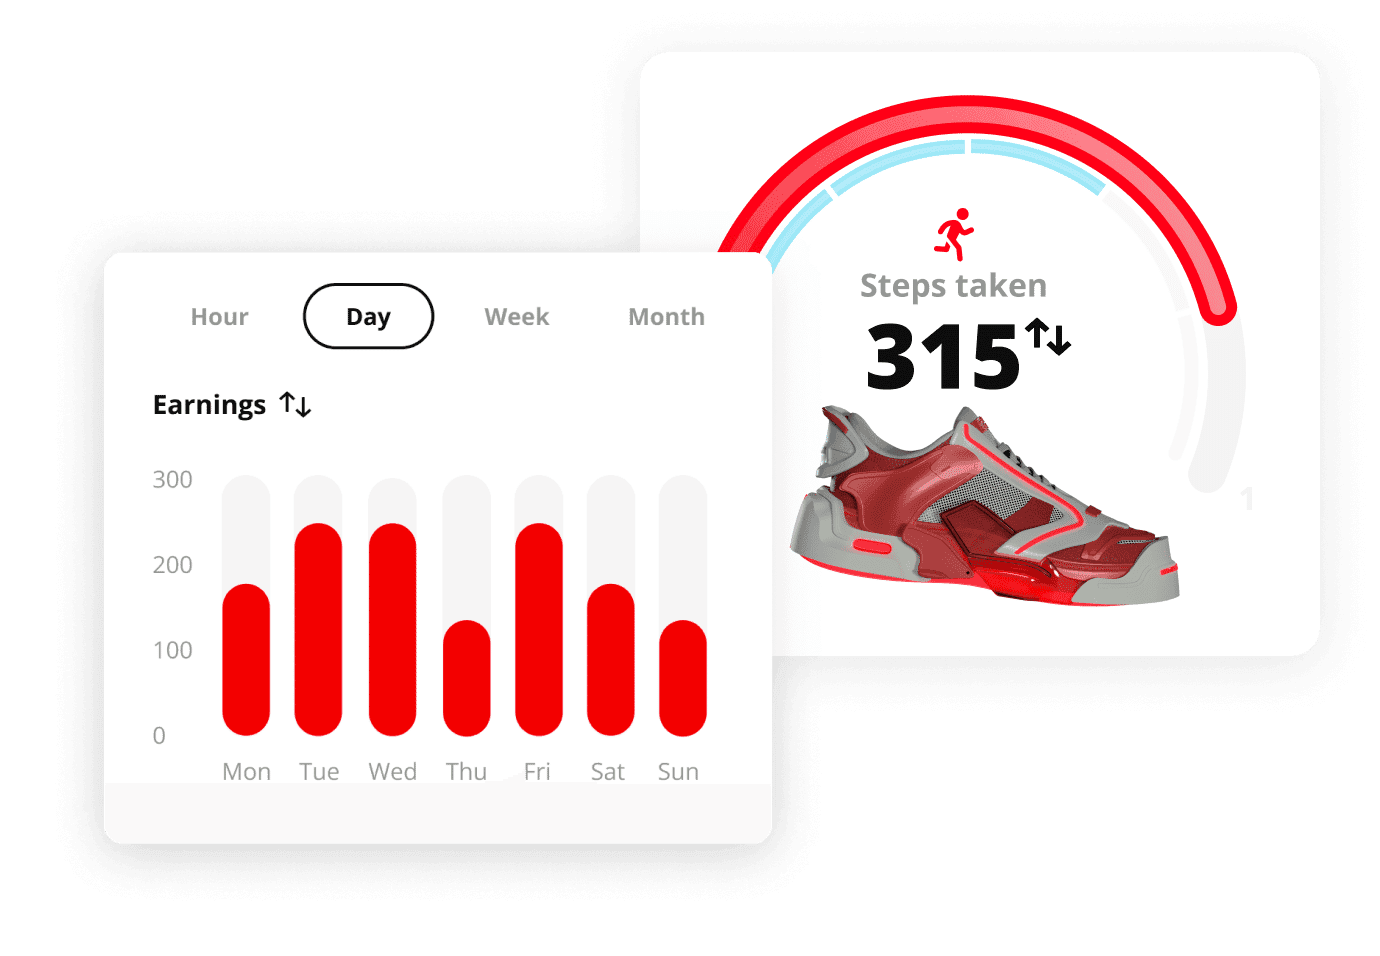 GetKicks, the Web3 app for sneaker enthusiasts. 3D NFT venture into the world "move to earn" while collecting futuristic and stylish footwear